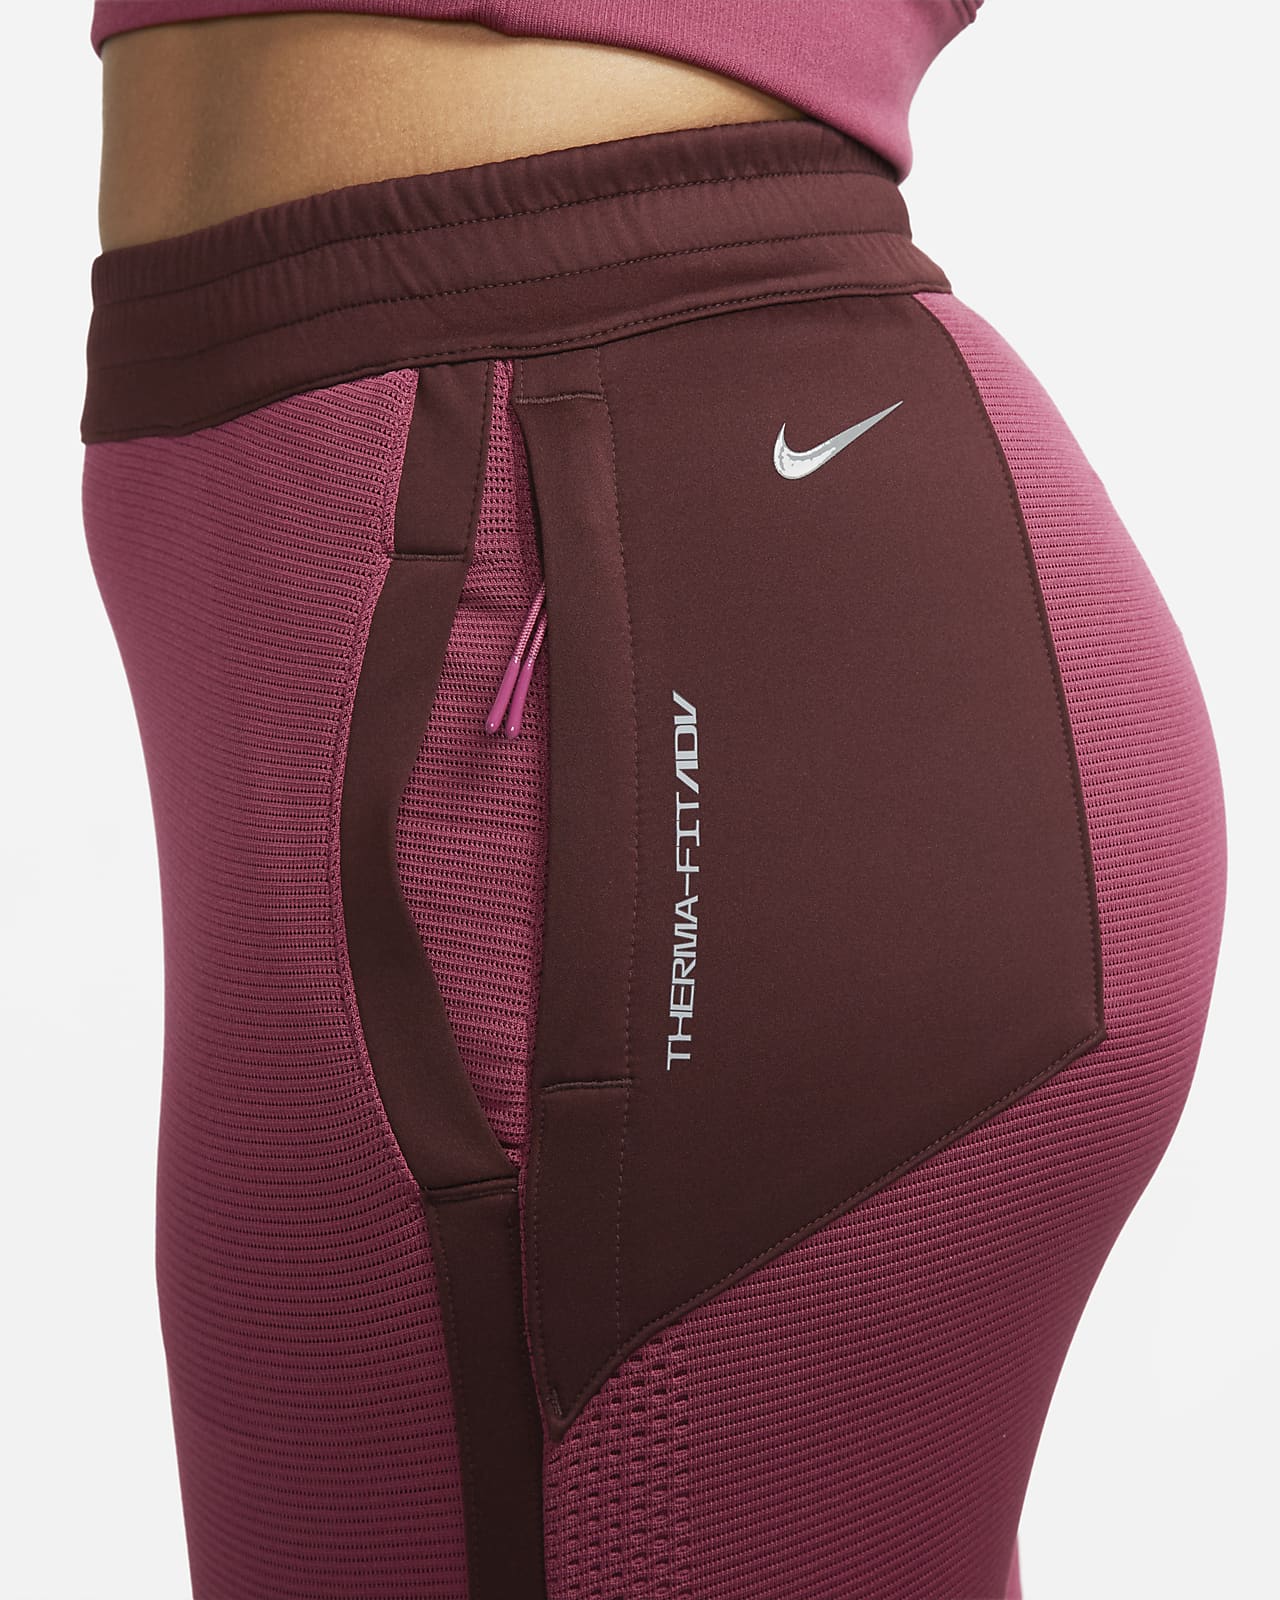 Nike Forward Trousers Men's Therma-FIT ADV Trousers. Nike IE